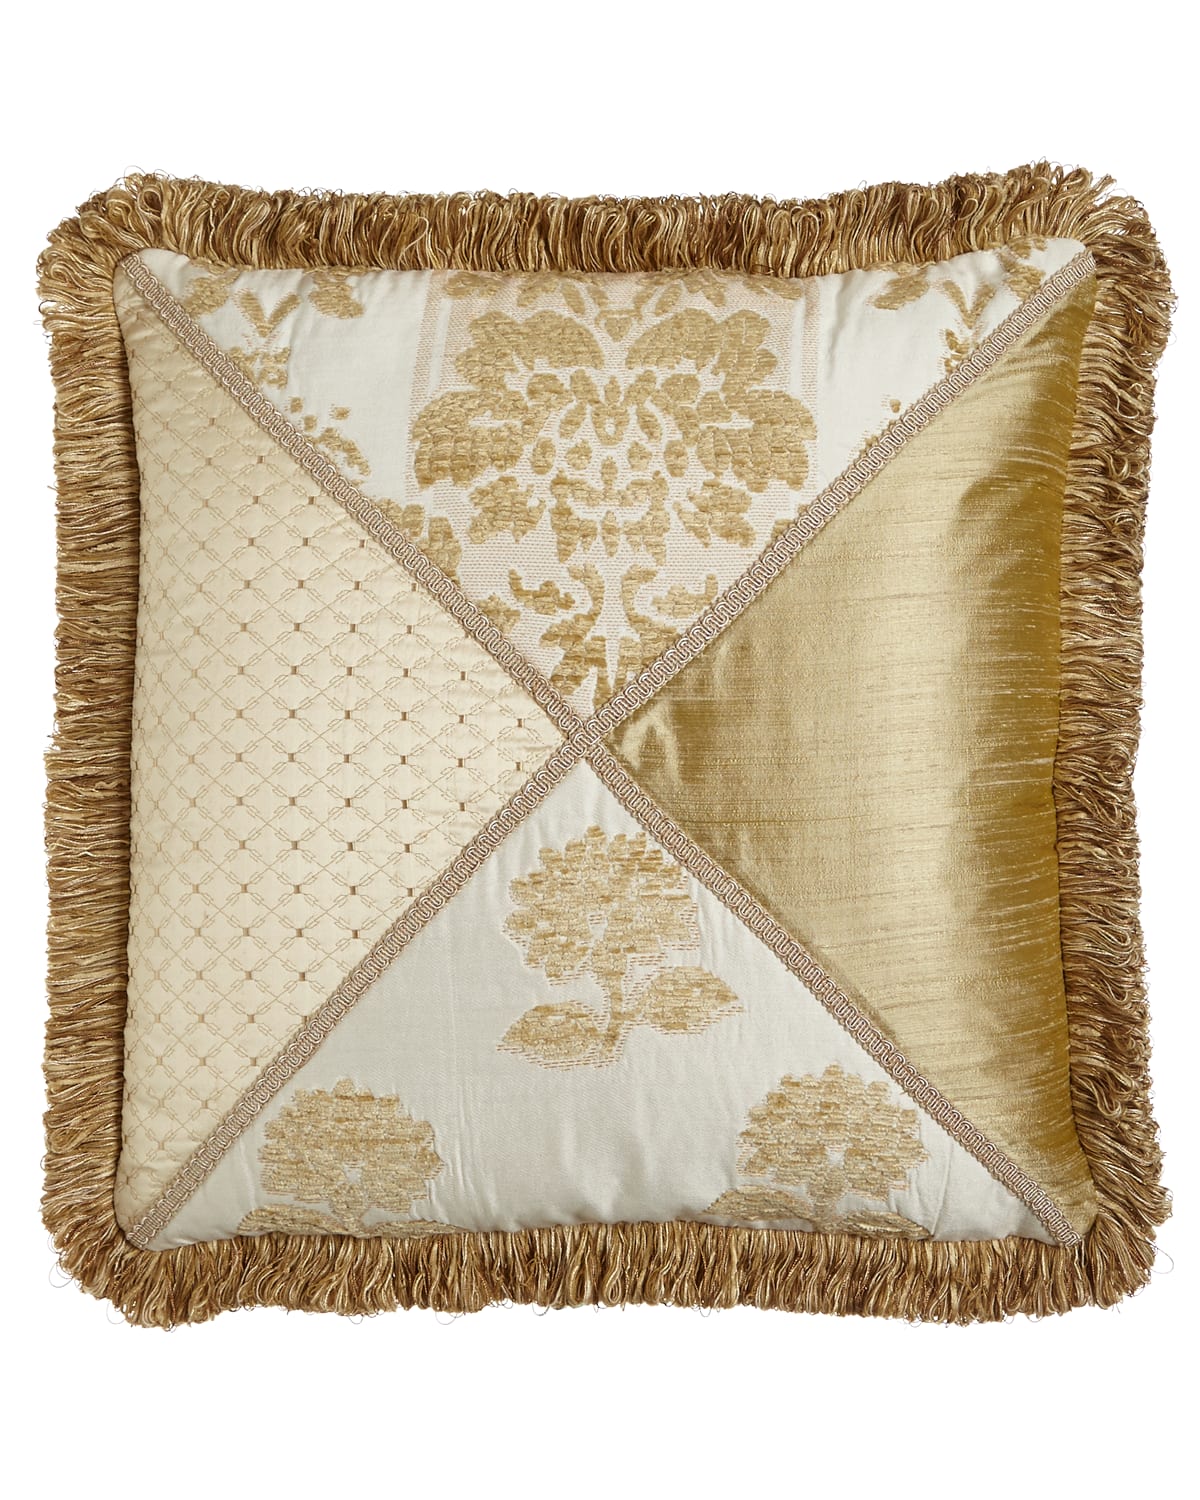 Austin Horn Collection Antoinette Pieced Pillow With Loop Fringe, 20"sq.